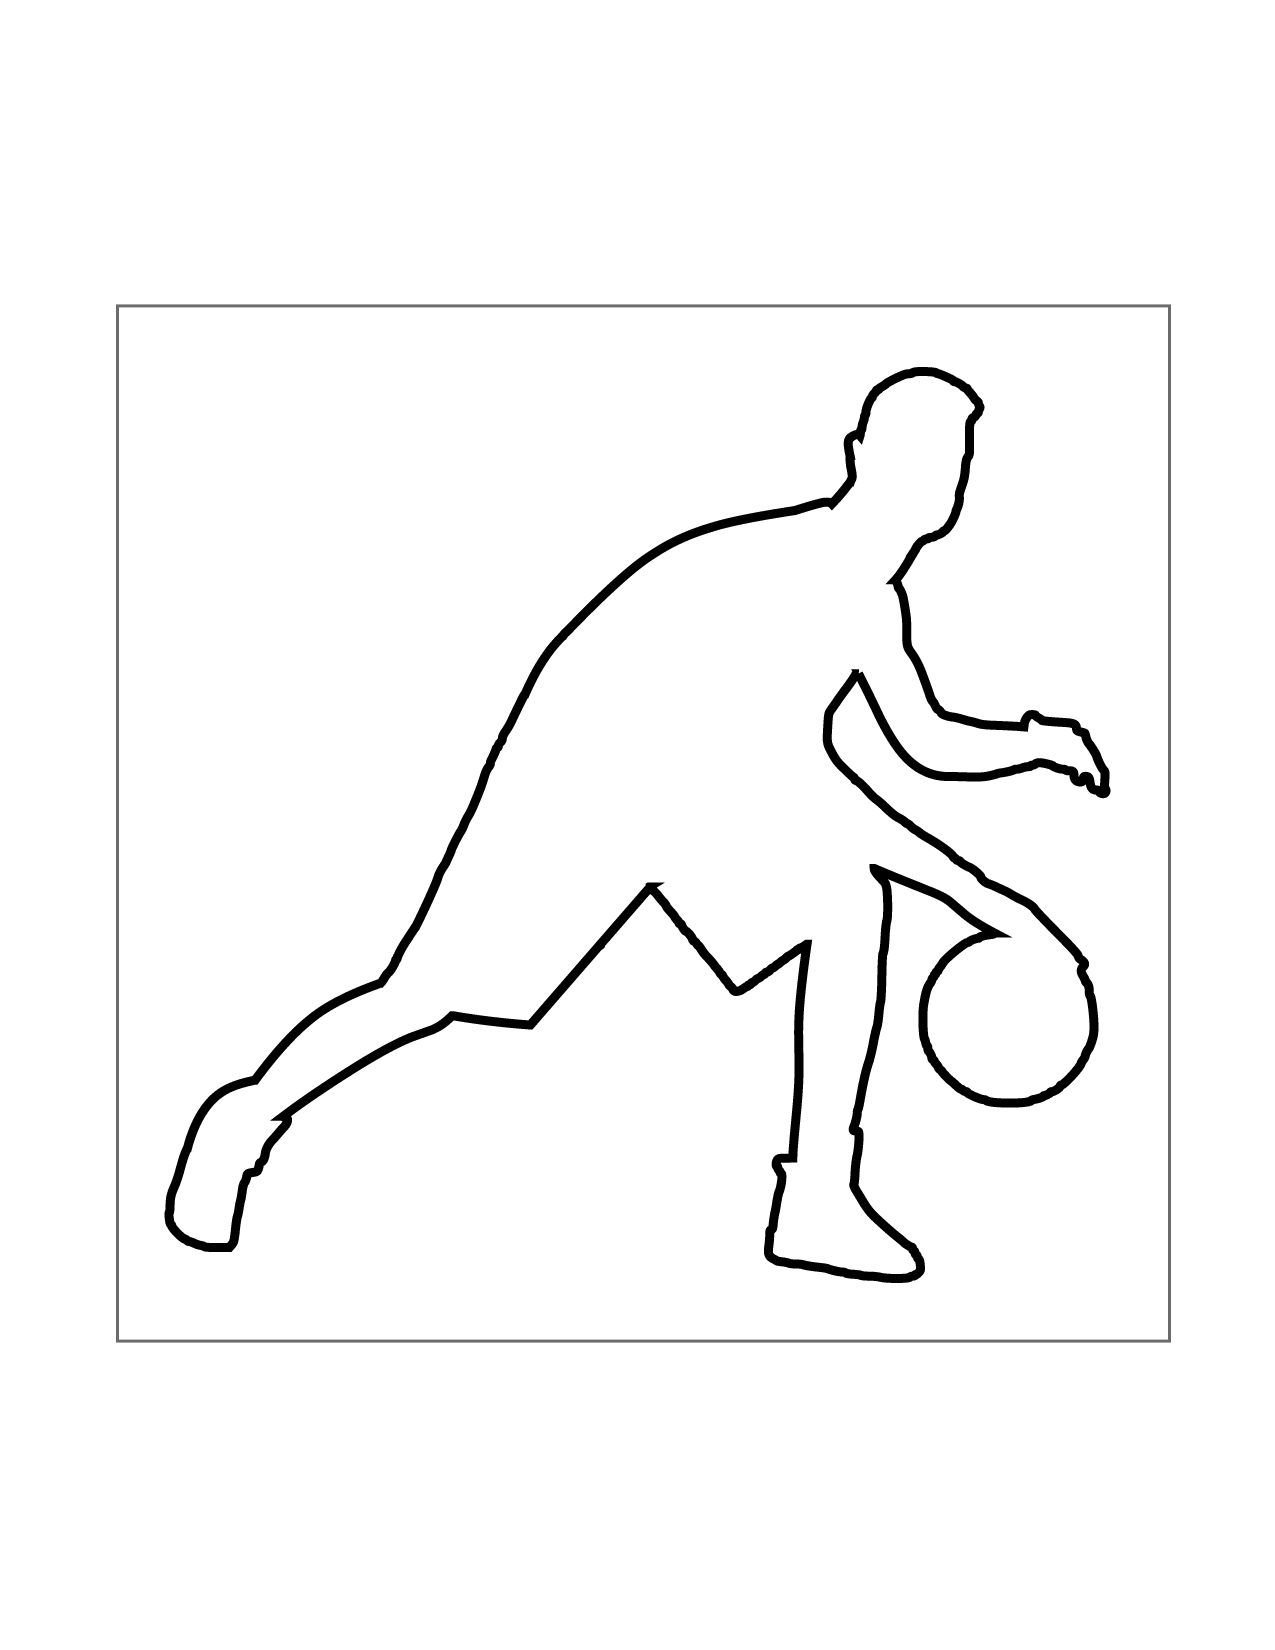 Basketball Dribbling Outling Coloring Page